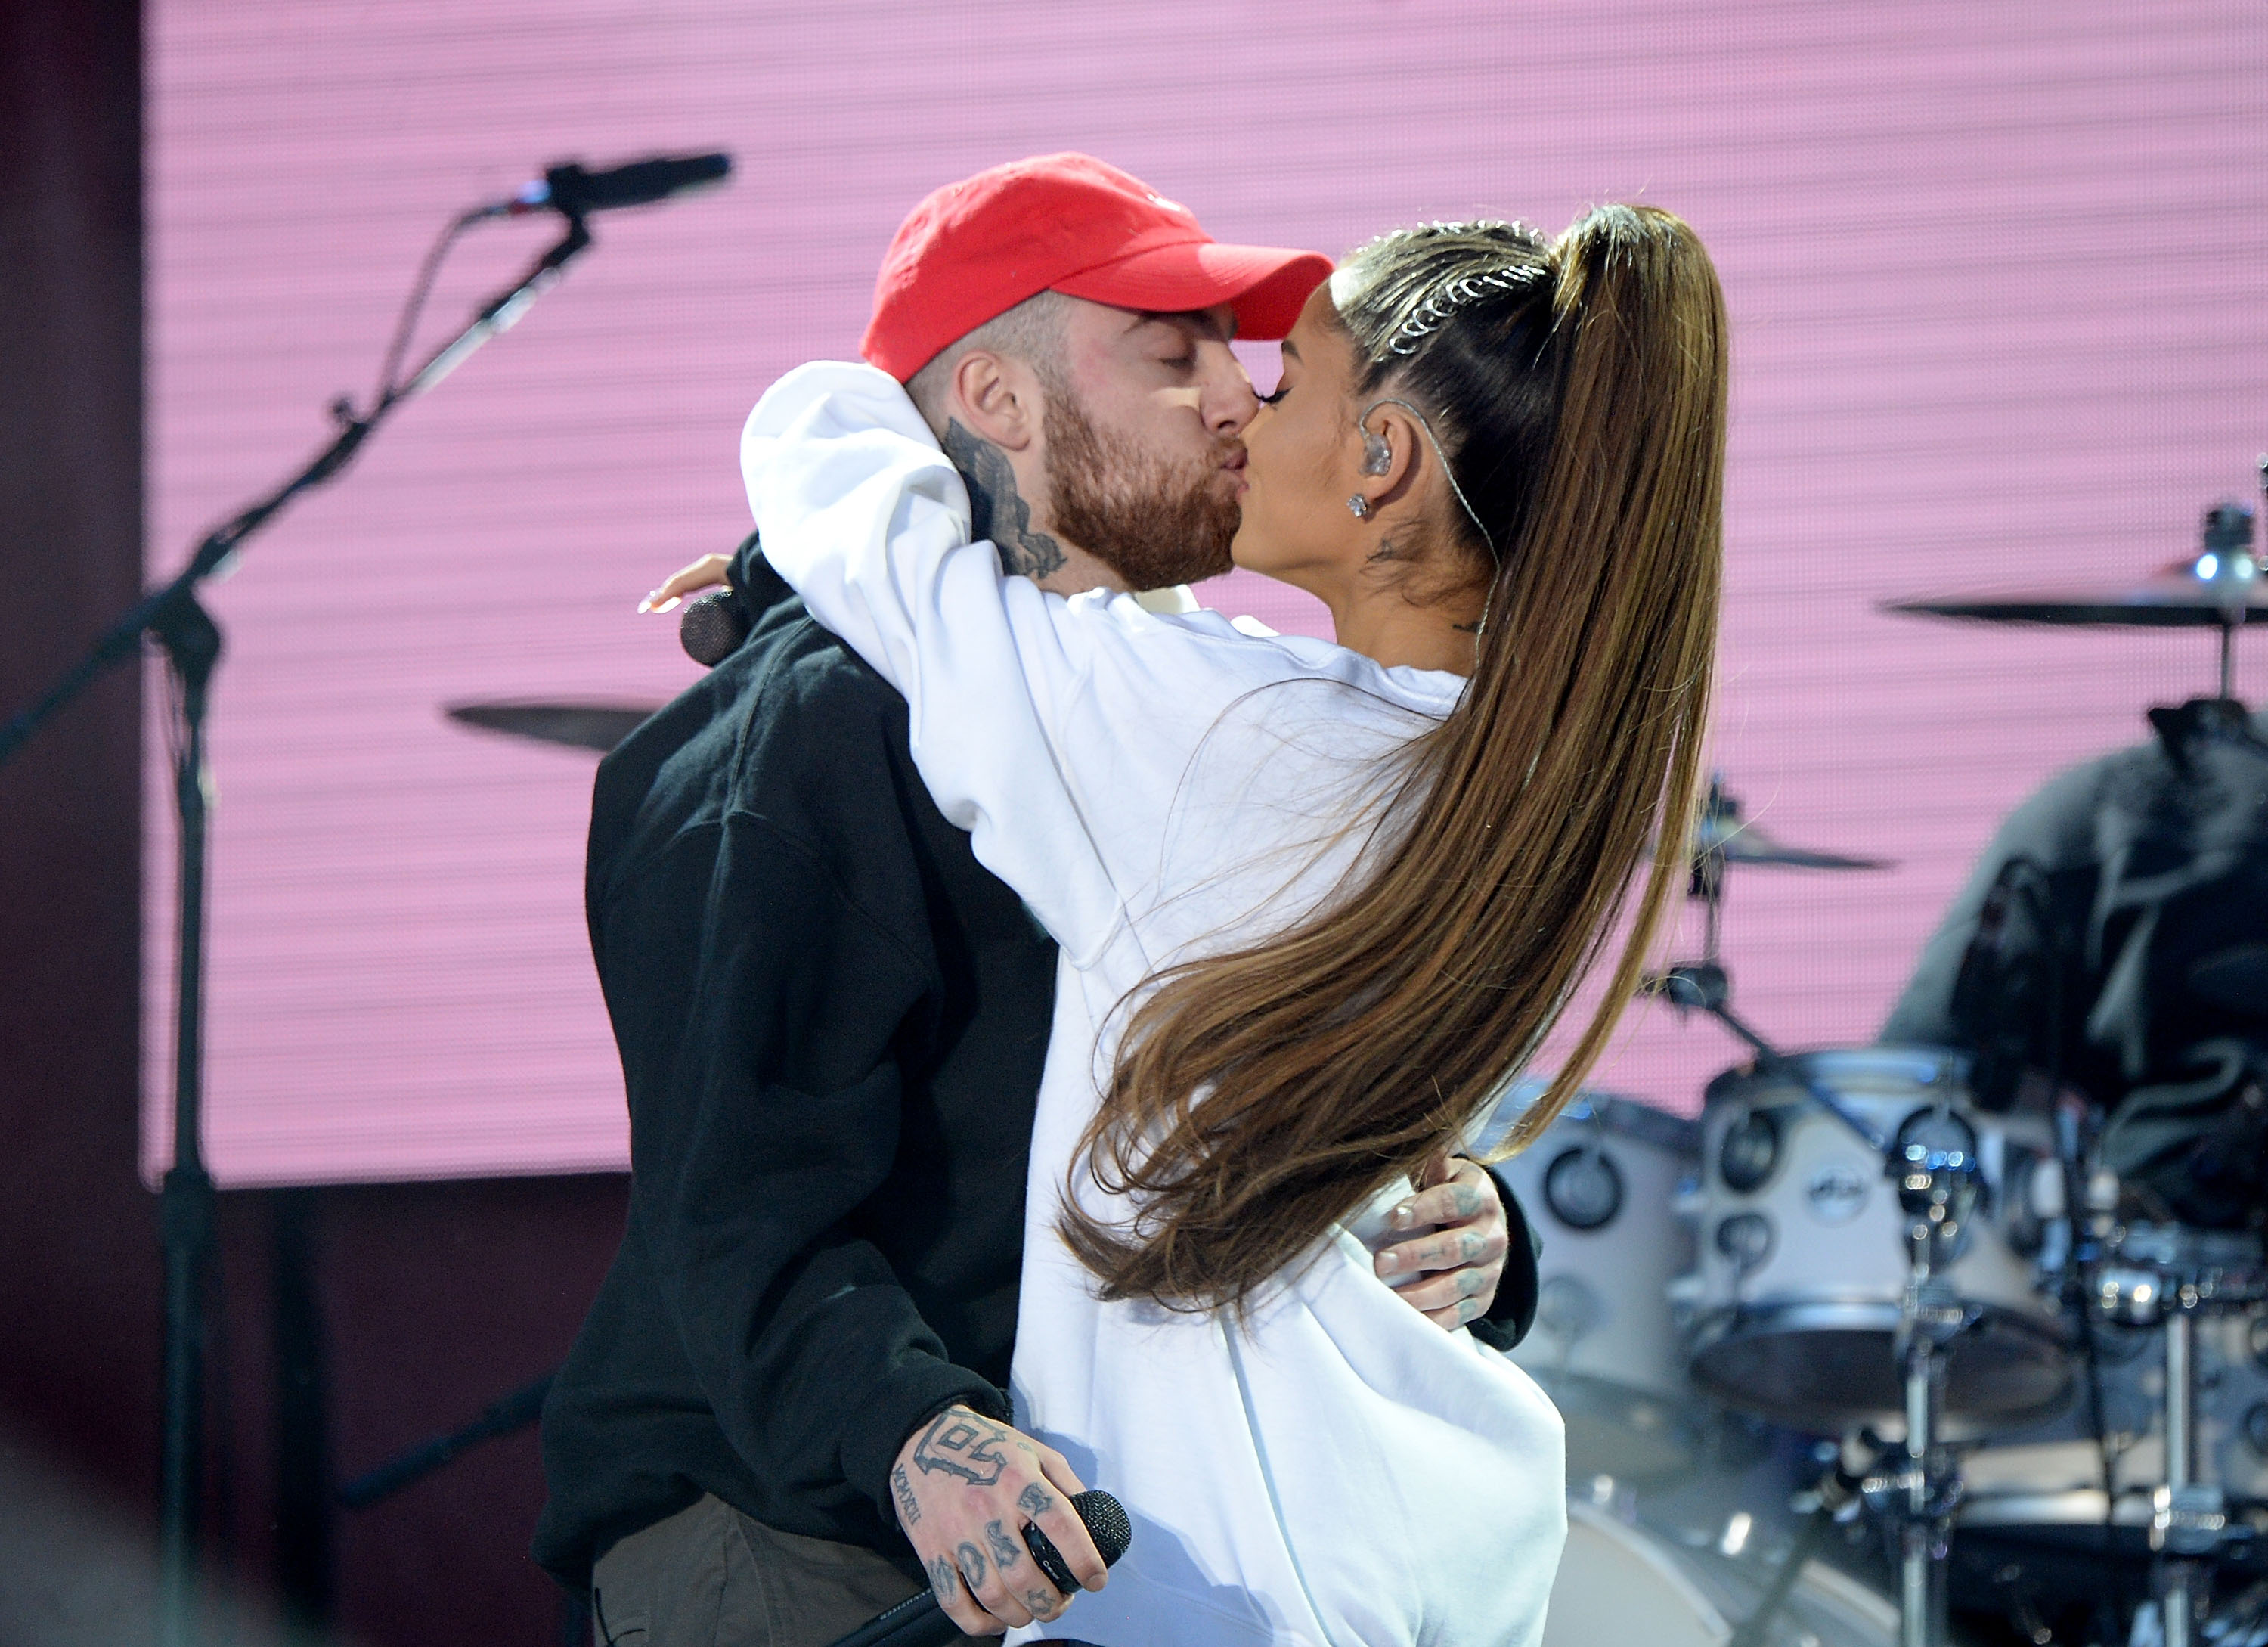 September 18th, 2016: Ariana Grande & Mac Miller during the